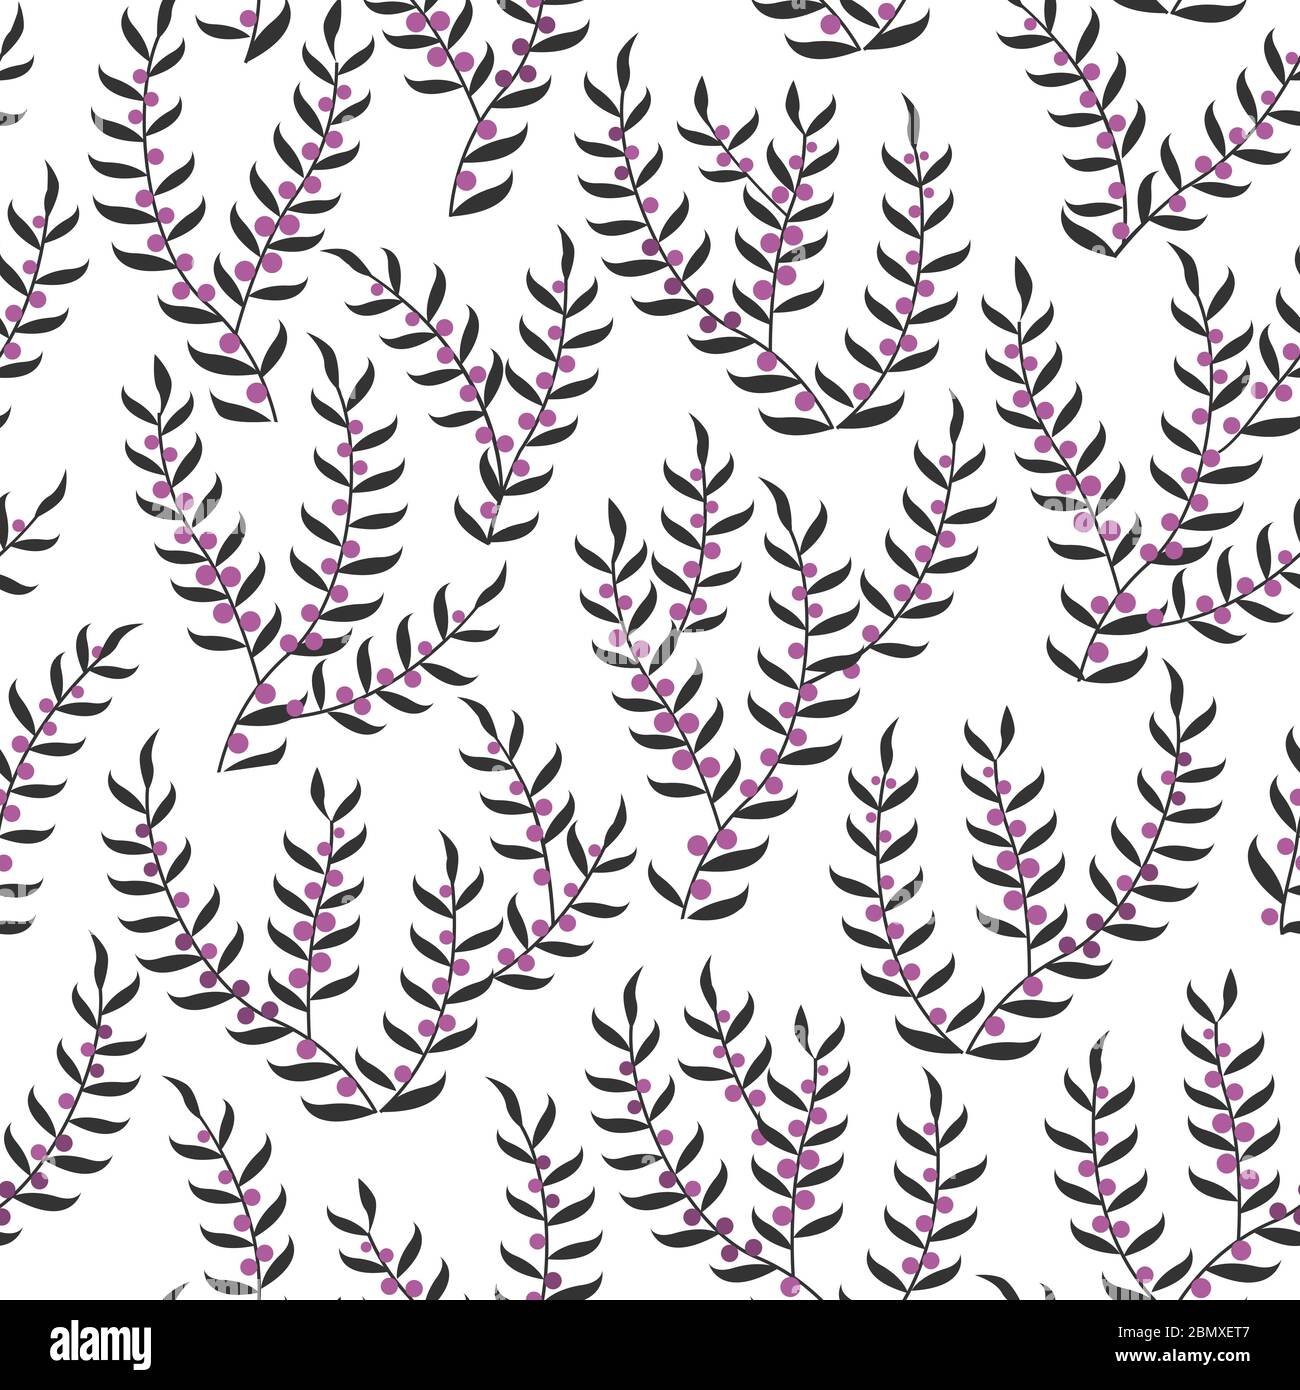 Vector seamless pattern with stylized heather branches. Beautiful floral design background for textile, bedding, wallpapers. Stock Vector